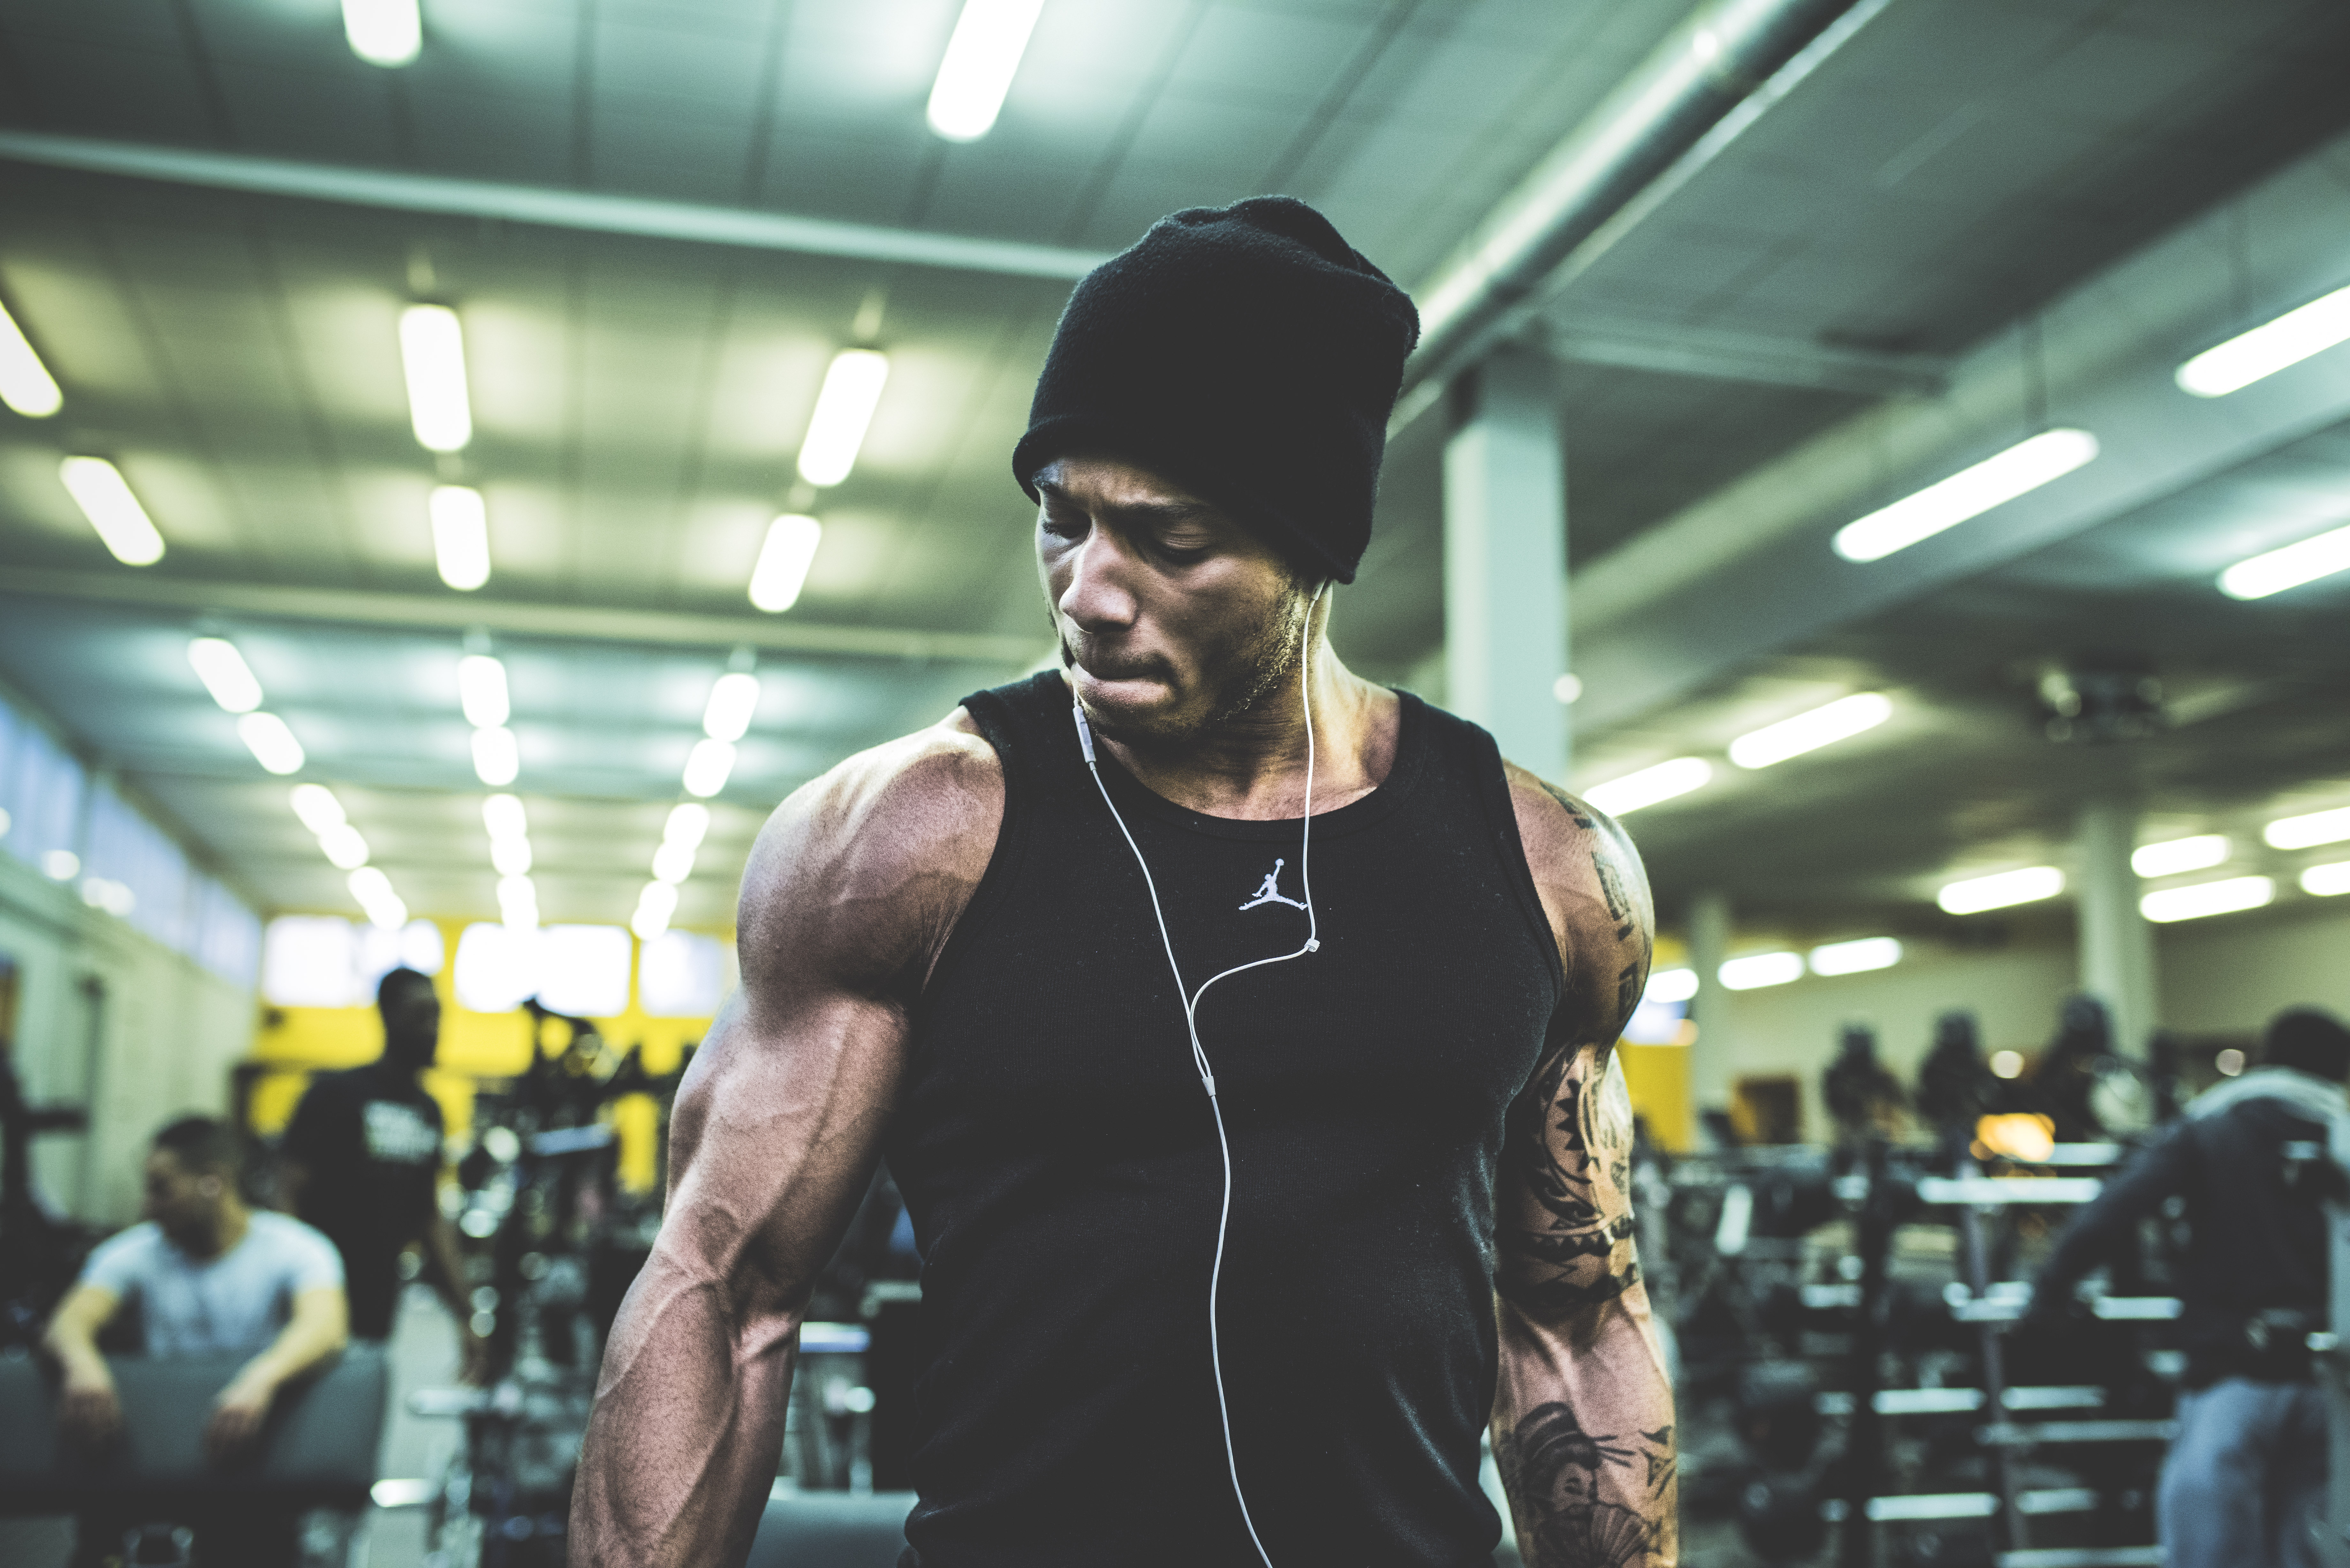 Wallpaper, men, black, model, room, standing, bodybuilding, structure, boy, man, fun, gym, power, Beast, crowd, fit, muscle, arm, strong, sport venue, physical fitness, facial hair, motivation, fitness professional 7360x4912